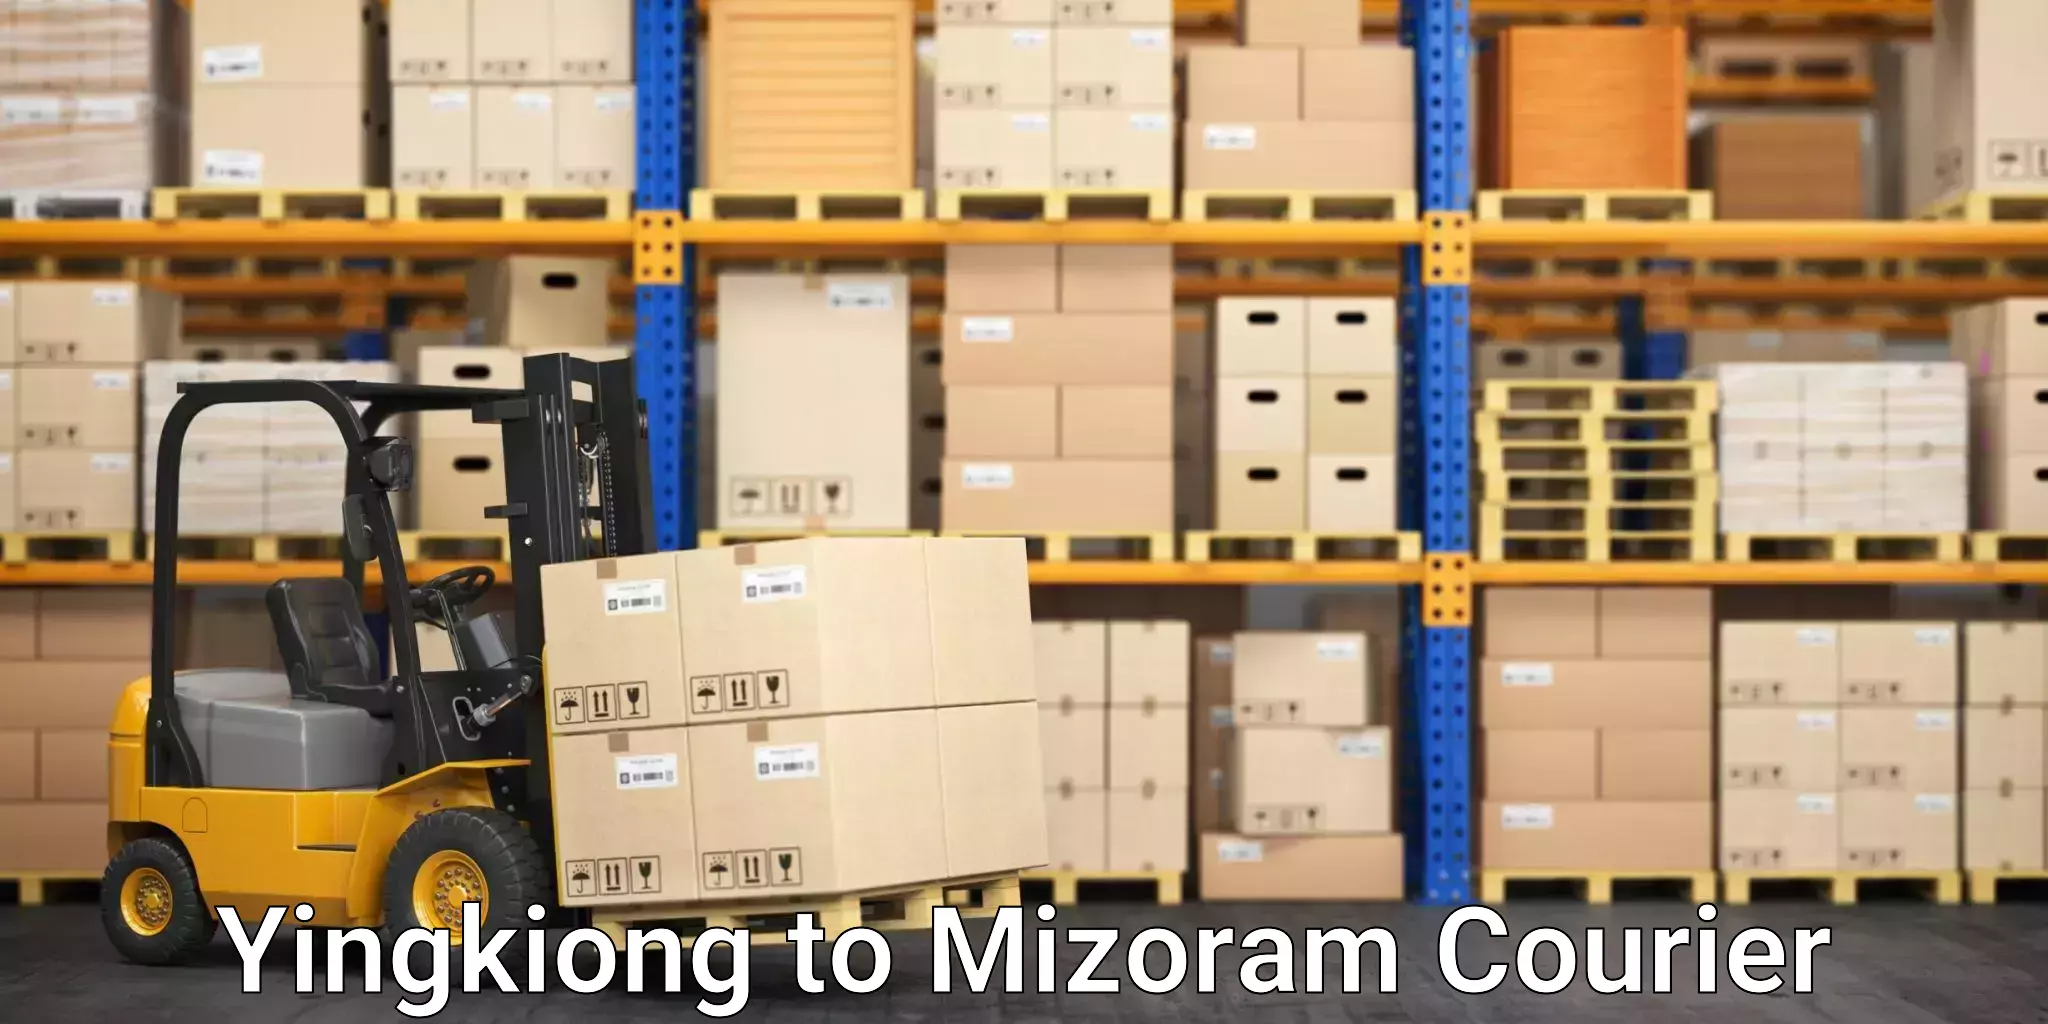 Advanced parcel tracking in Yingkiong to Mizoram